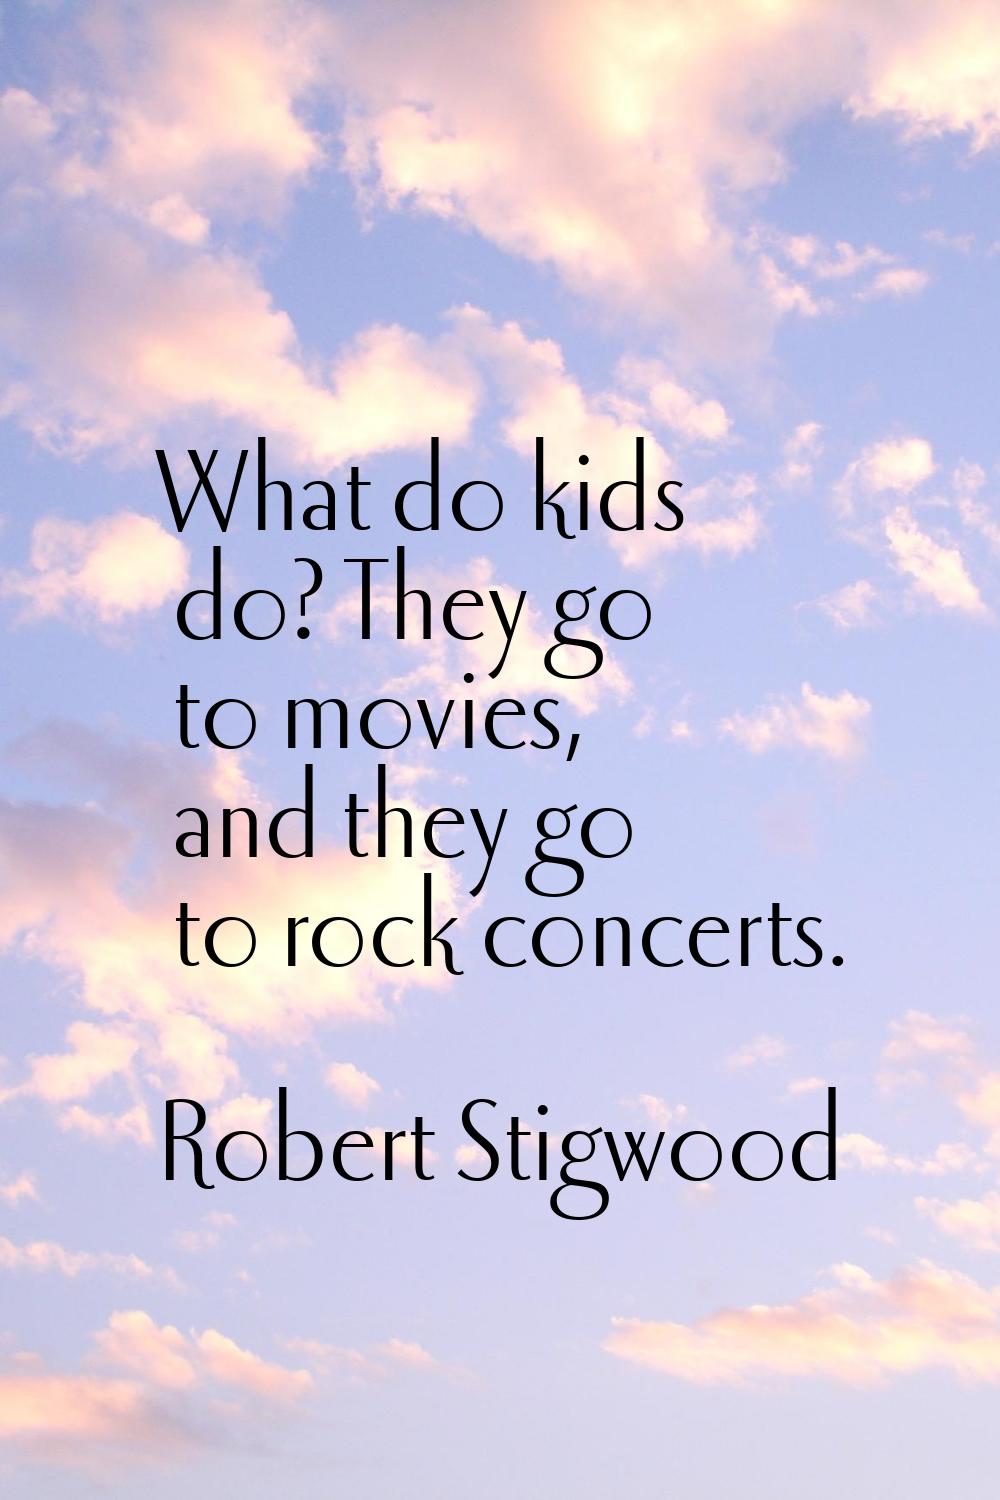 What do kids do? They go to movies, and they go to rock concerts.